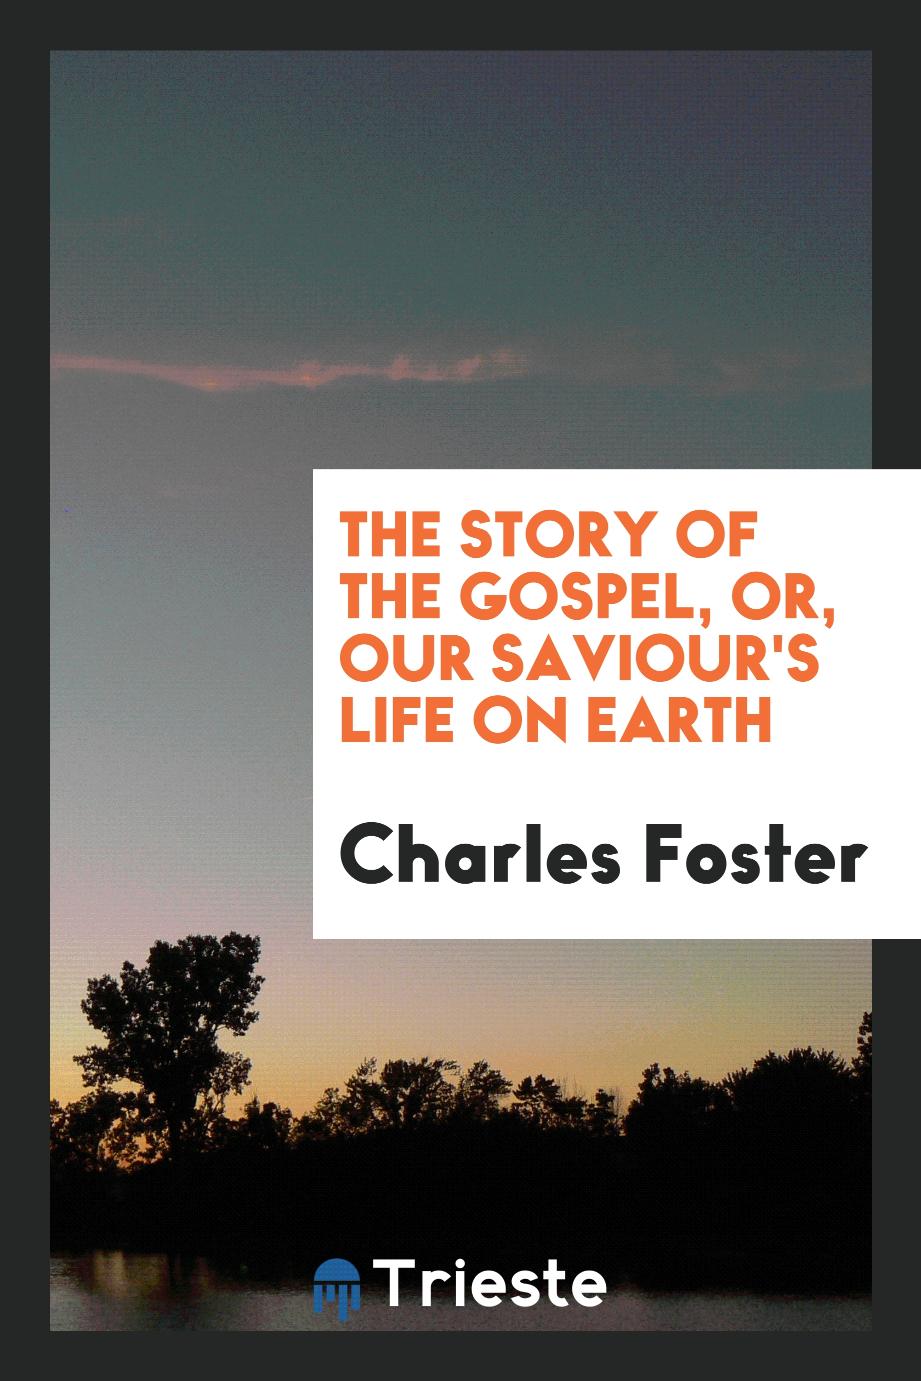 The story of the Gospel, or, Our Saviour's life on earth